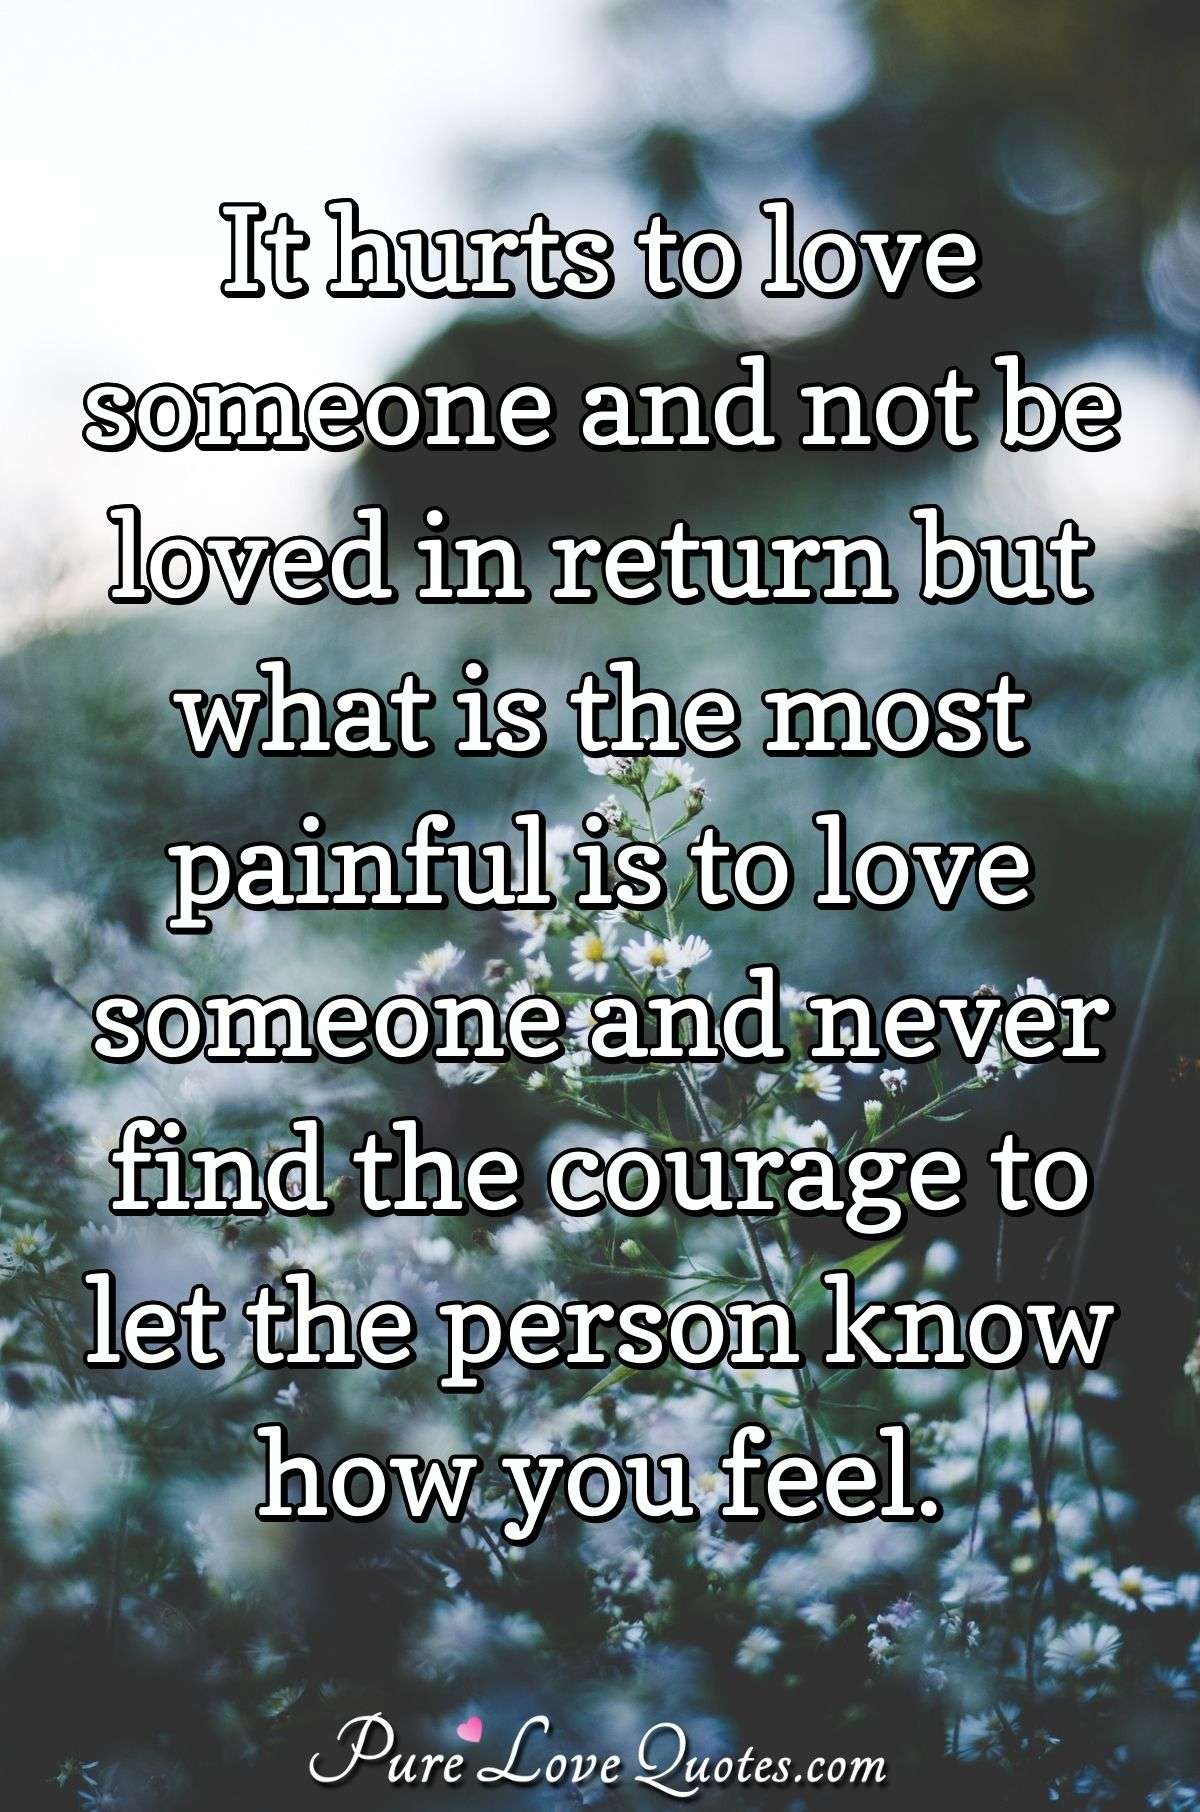 It hurts to love someone and not be loved in return but what is the most painful is to love someone and never find the courage to let the person know how you feel. - Anonymous